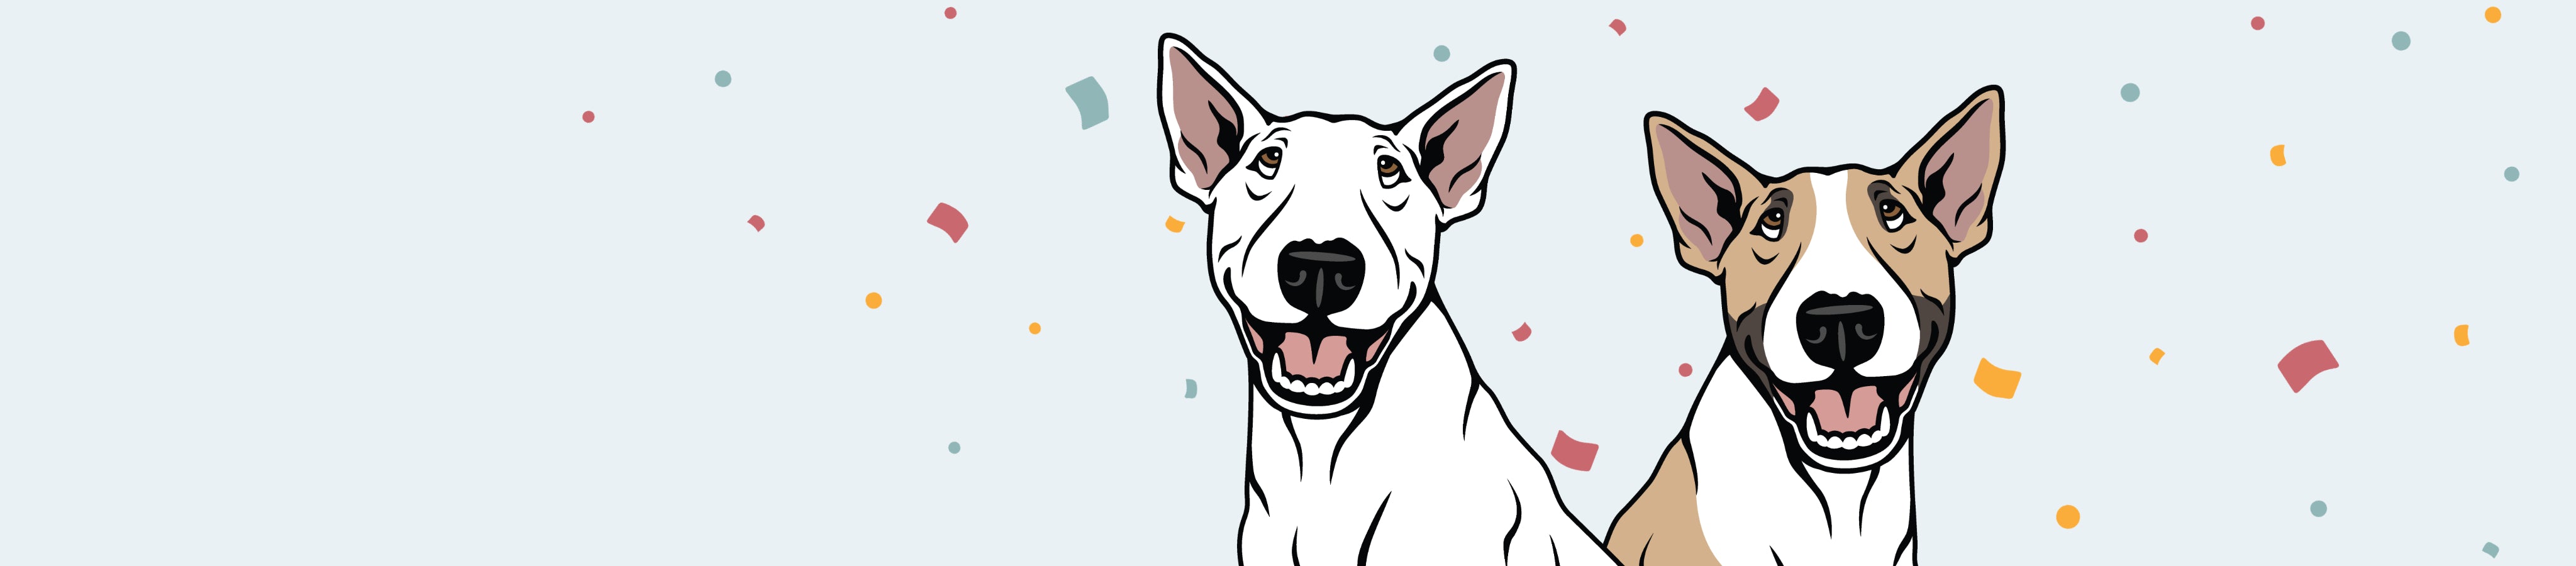 Illustrations showing our latest breed: Bull Terriers